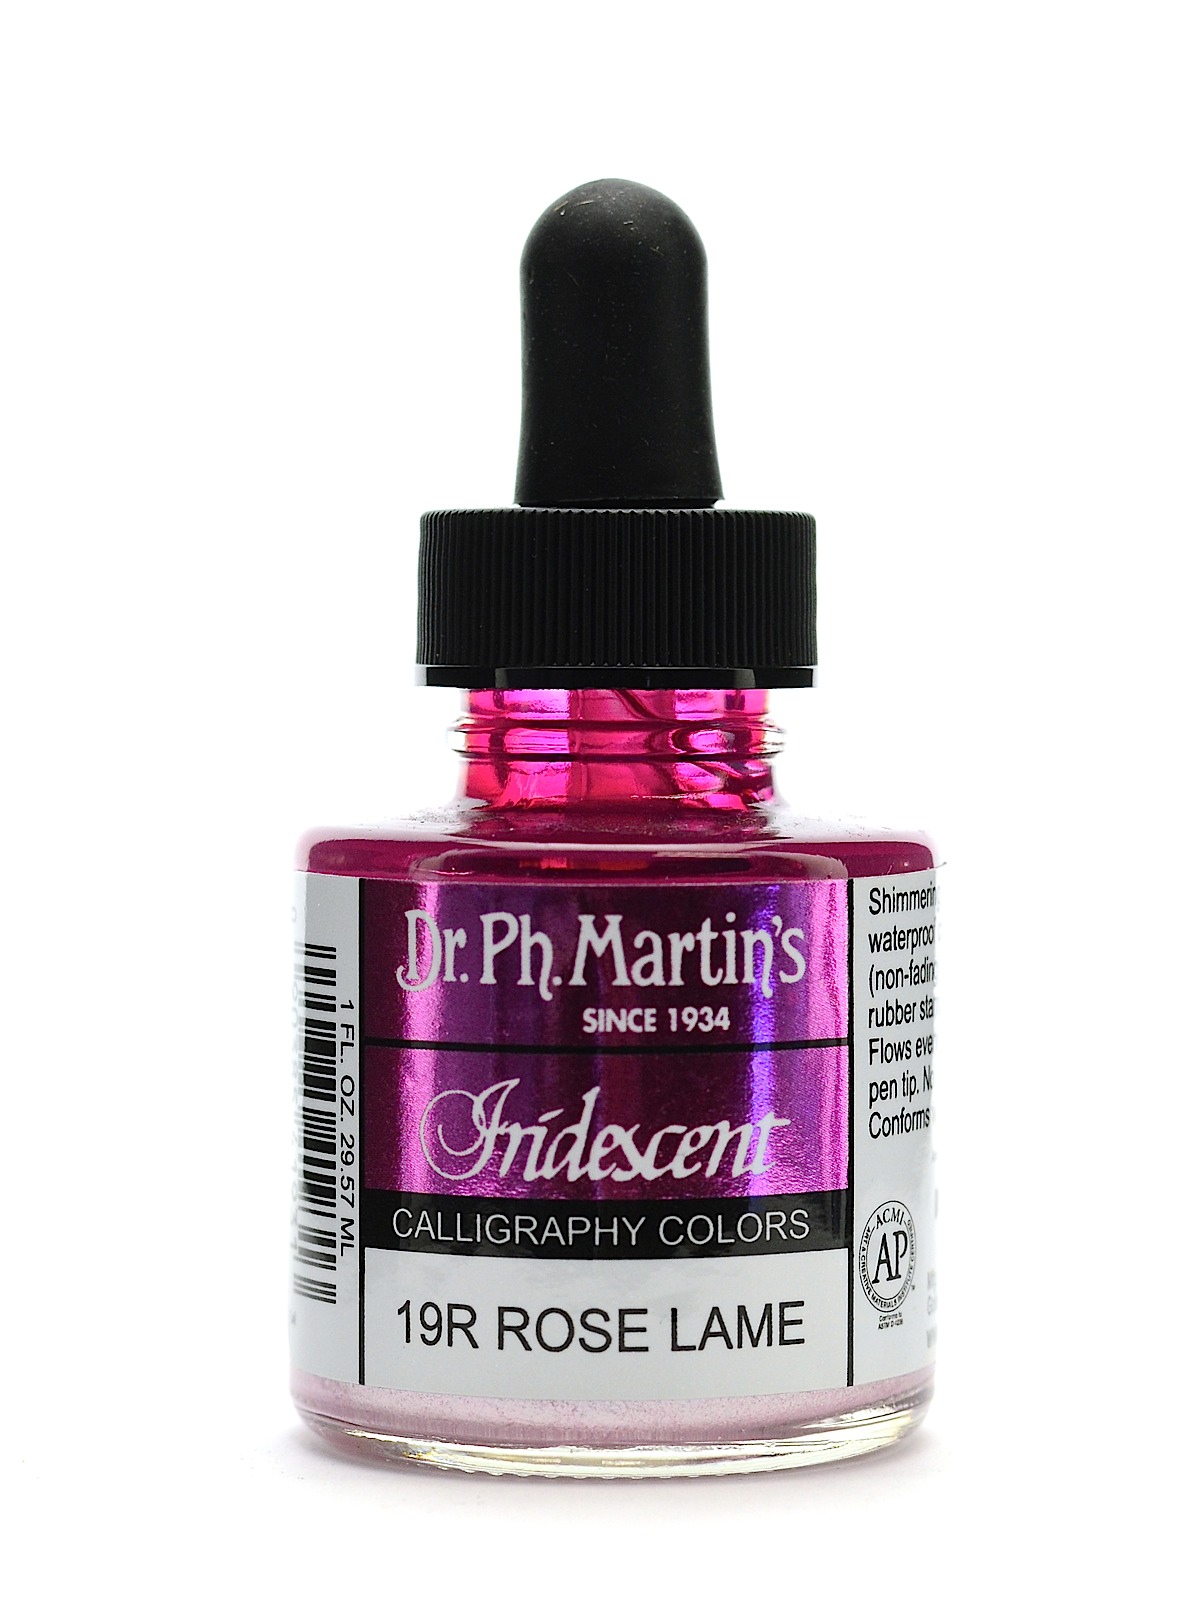 Iridescent Calligraphy Colors 1 Oz. Rose Lame